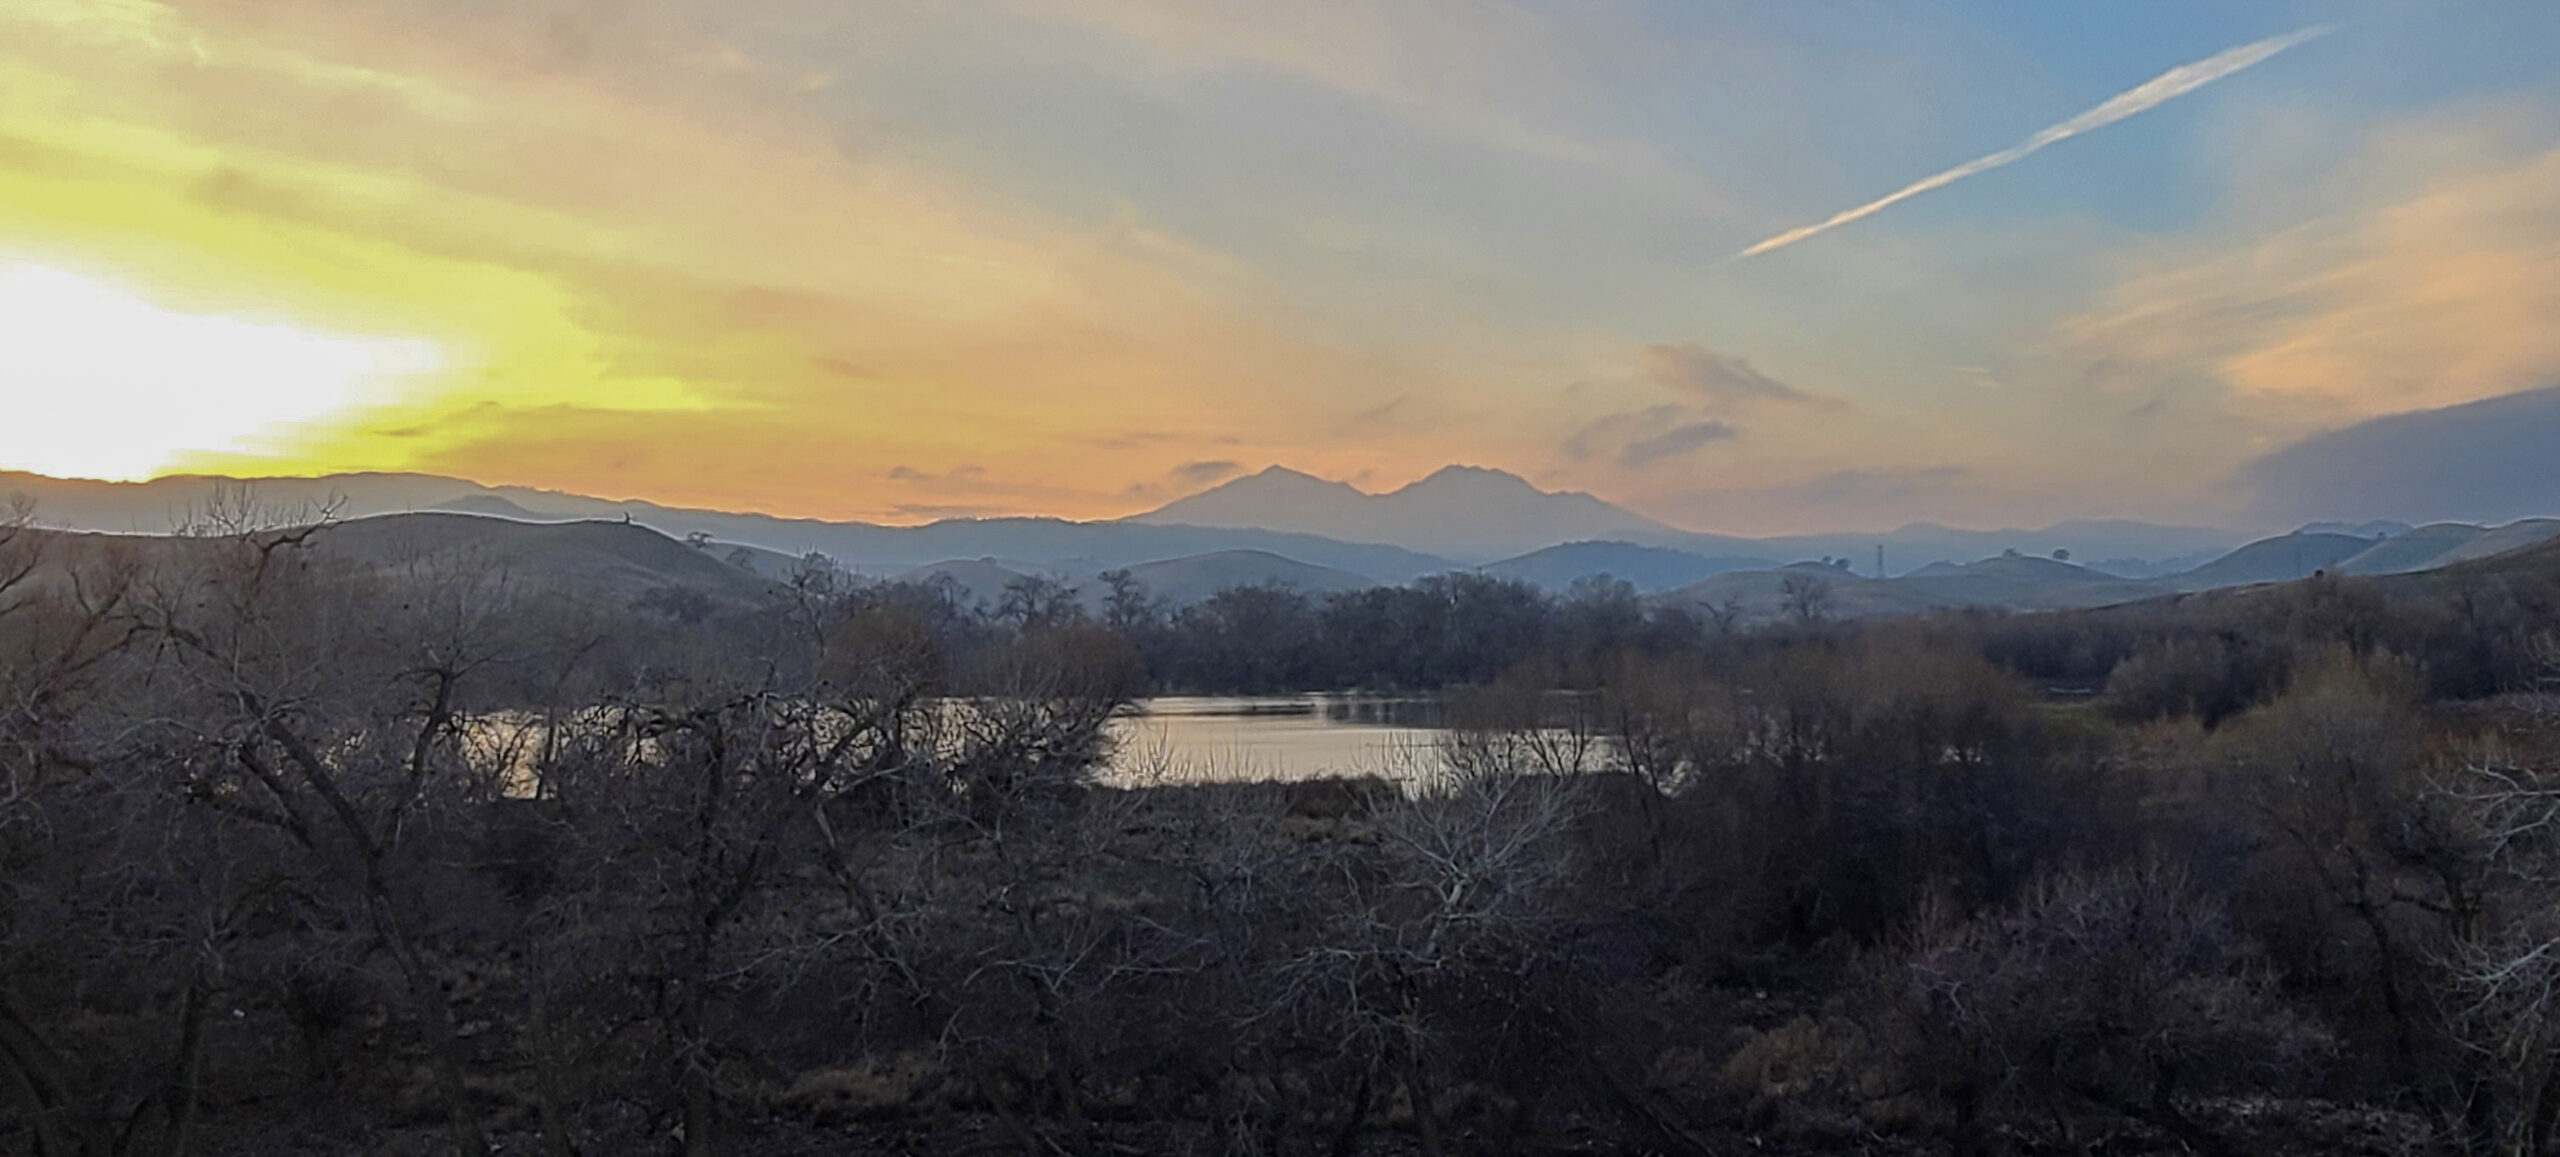 Marsh Creek Reservoir in the foreground surrounded by trees with a sunset showing off the dimension of Diablo foothills in a hazy evening.